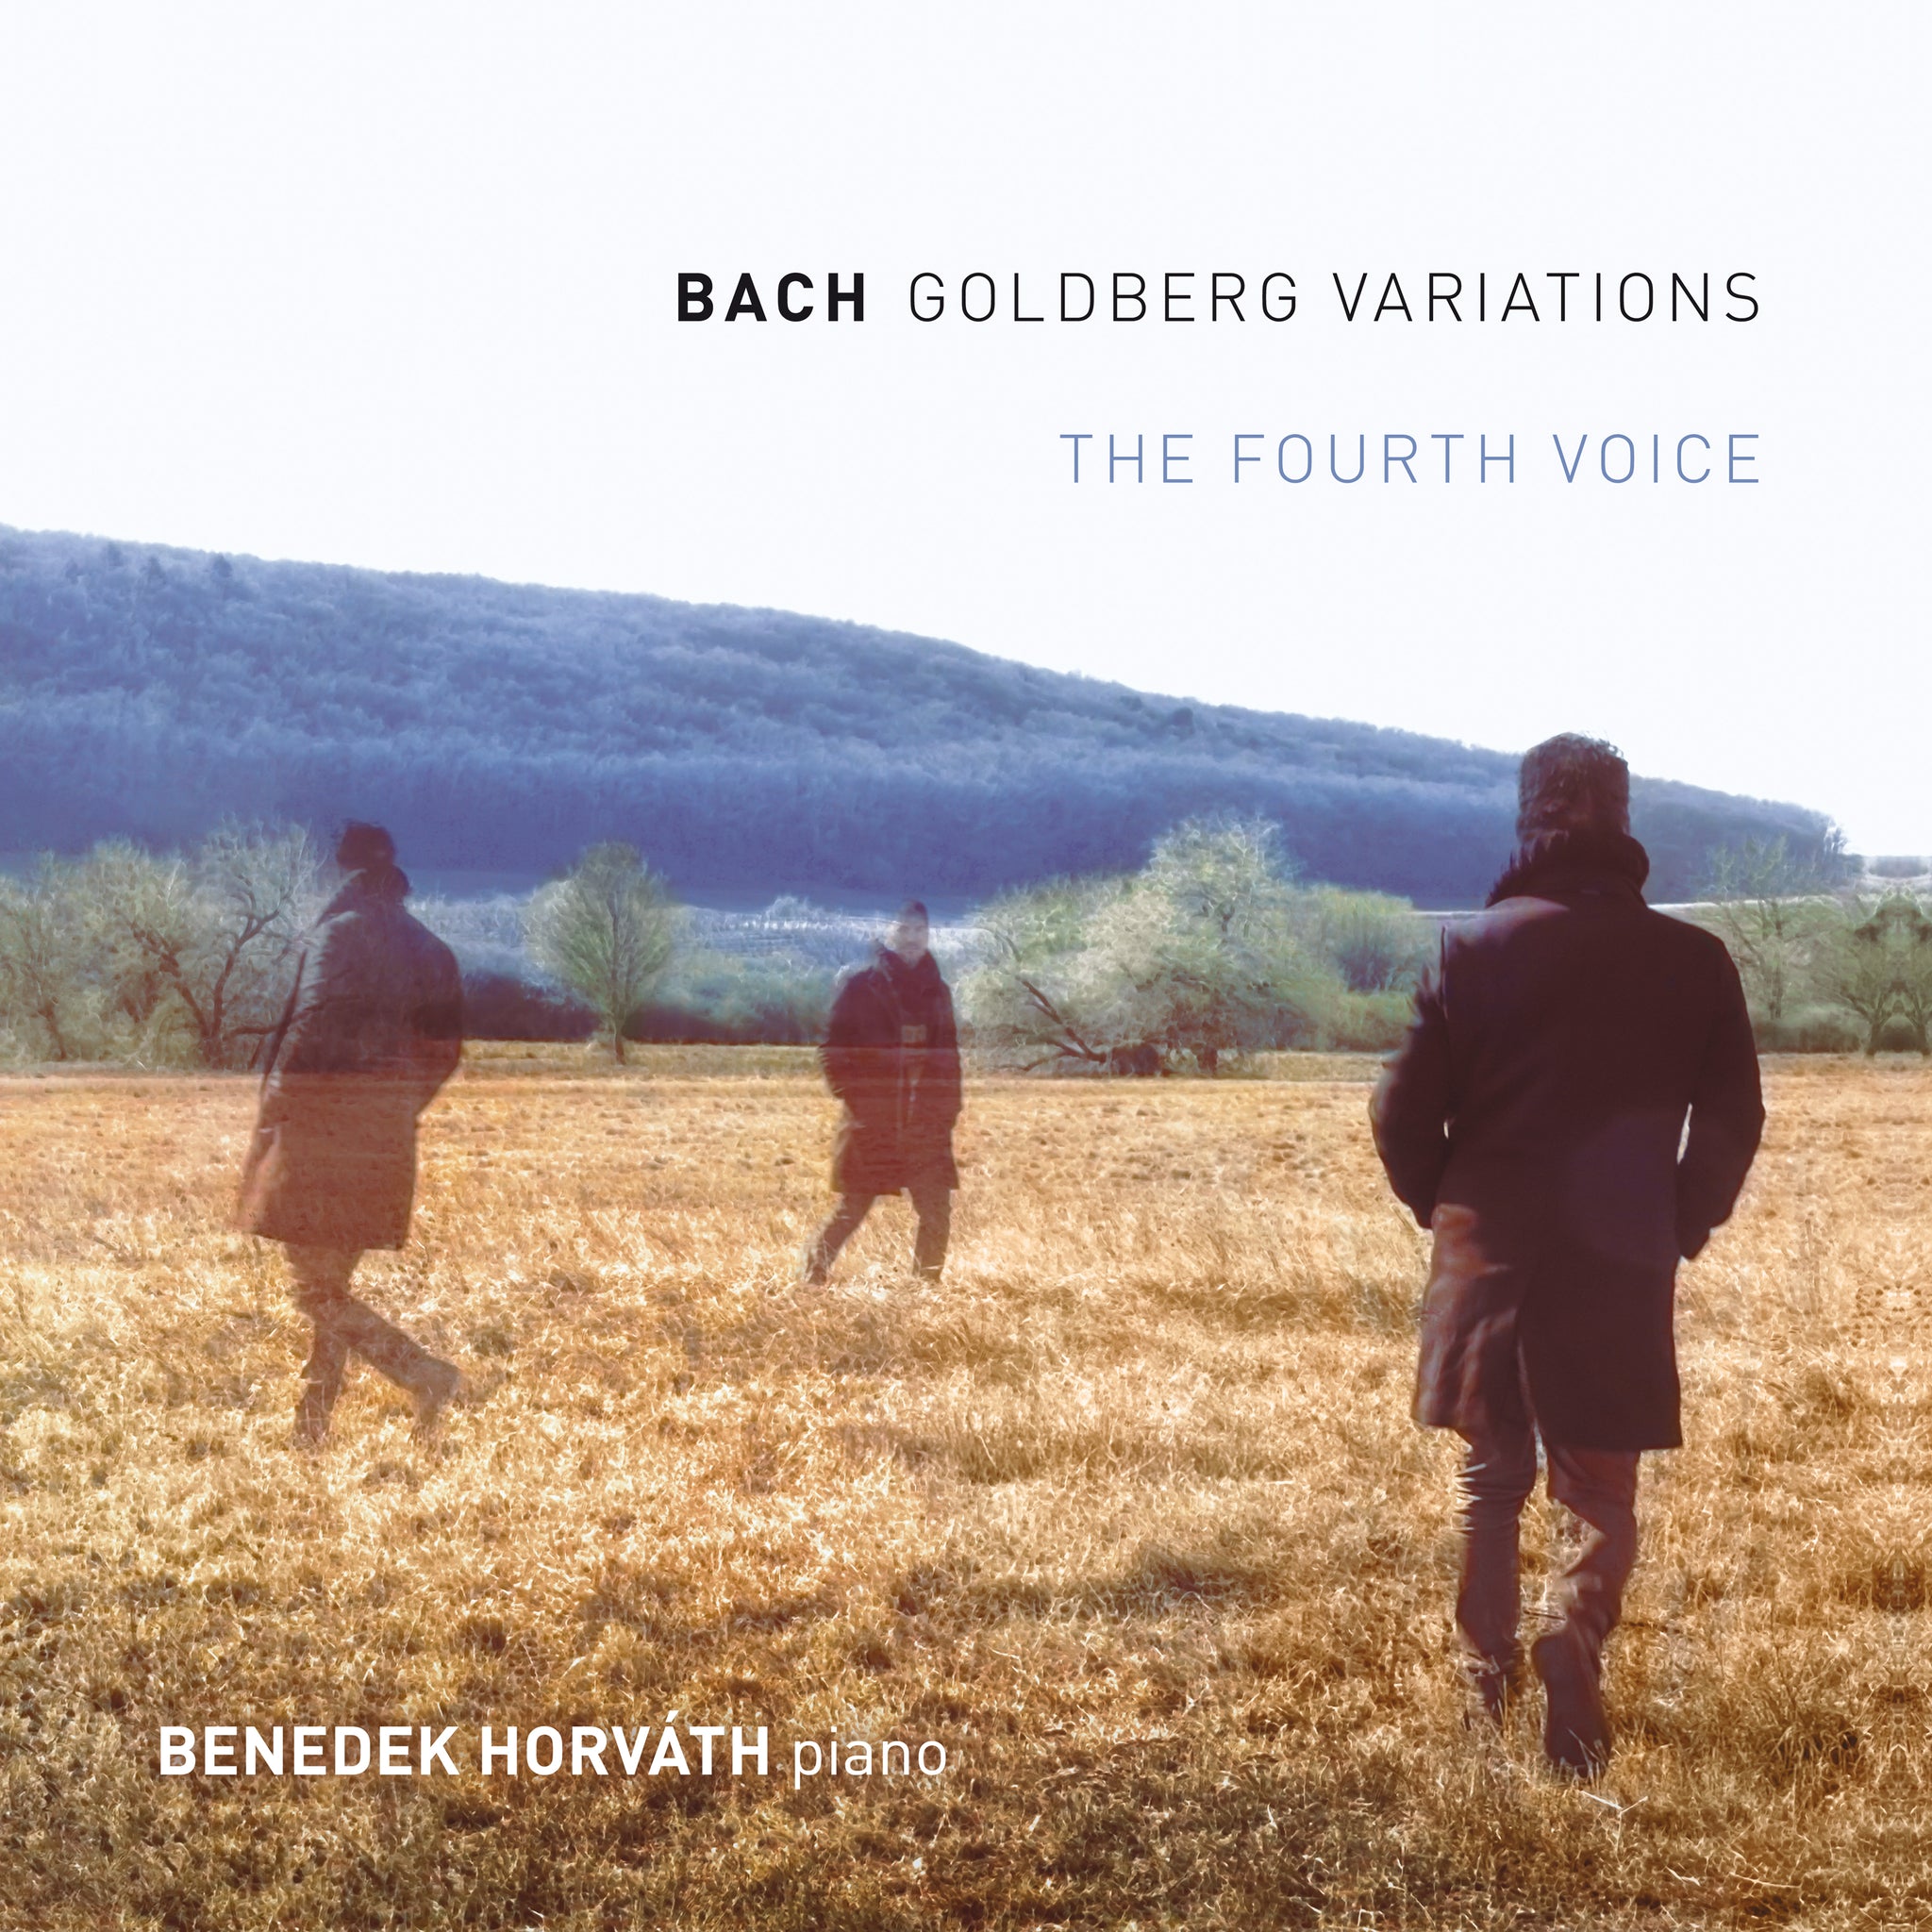 Benedek Horvath - Bach Goldberg Variations, The Fourth Voice